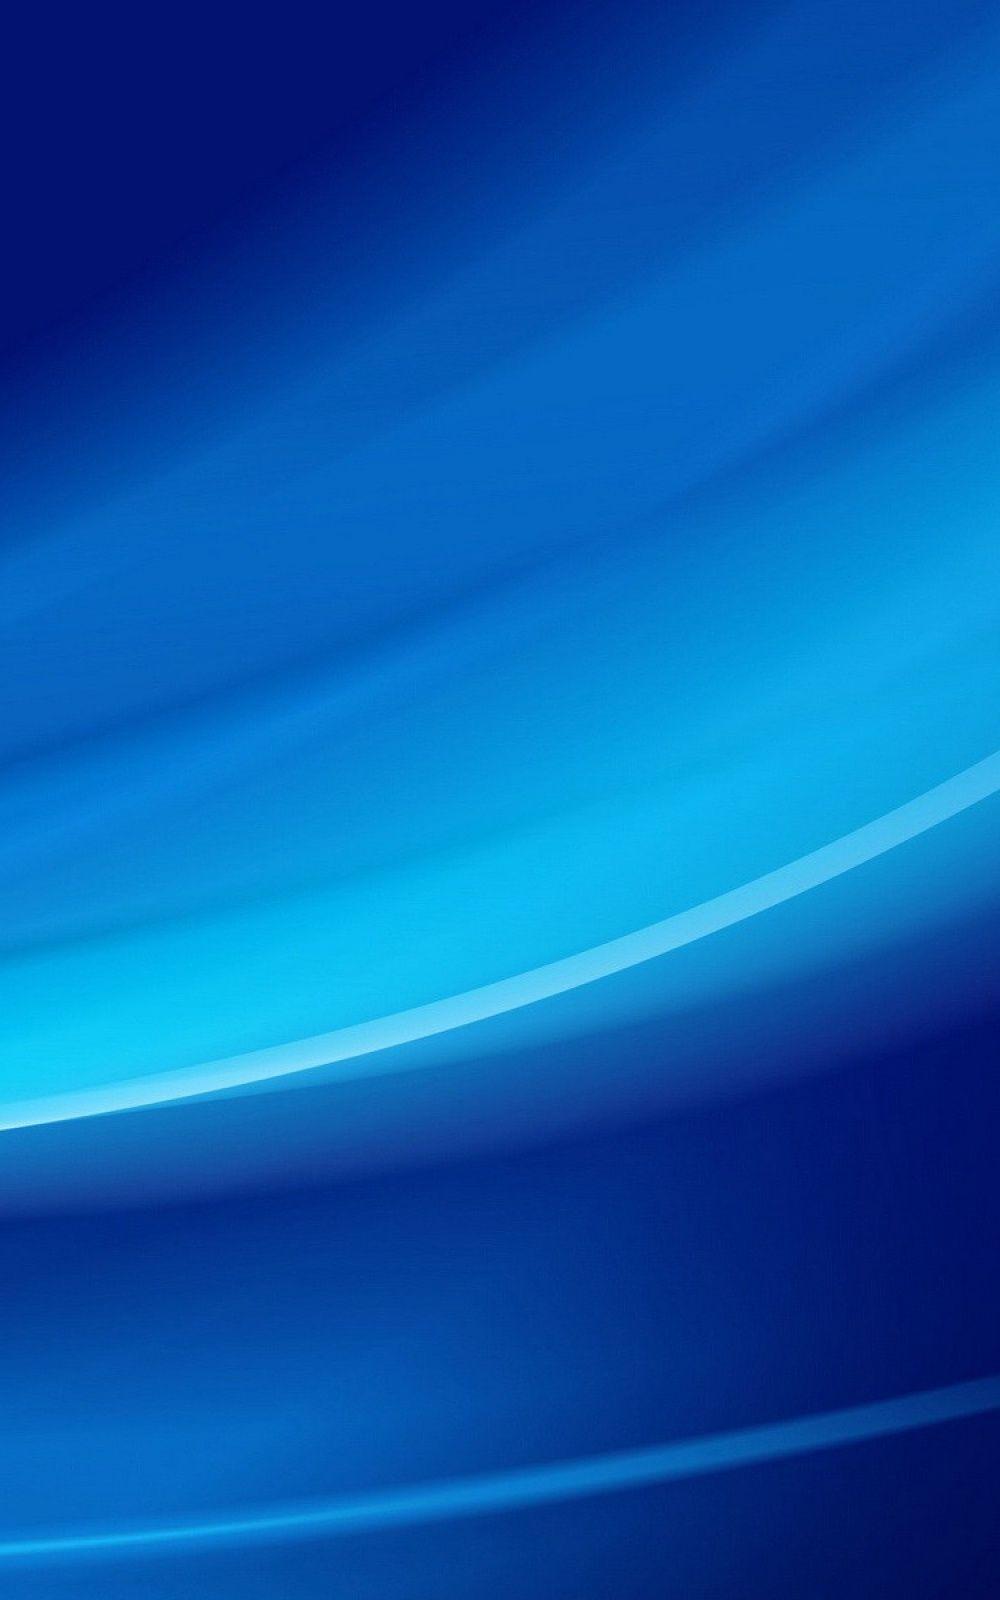 Blue Wallpaper HD For Android. (38++ Wallpaper)